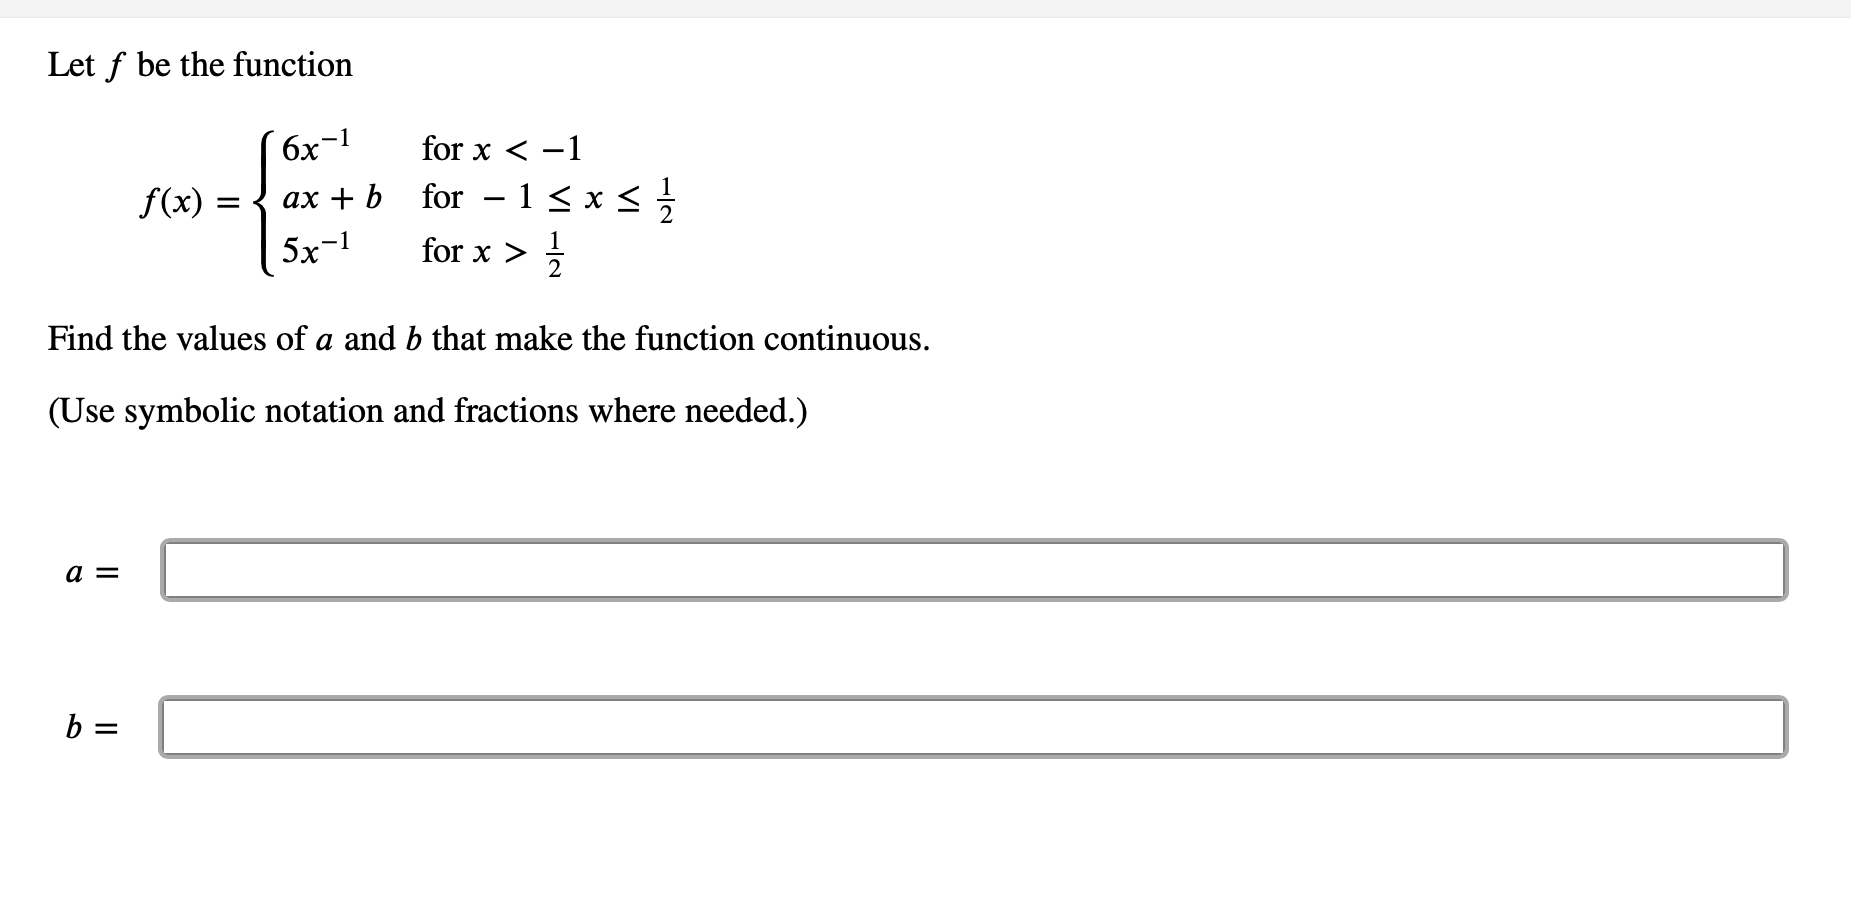 Let f be the function
6x-1
for x < -1
f(x) = { ax + b for - 1< x s
5x-1
for x >
Find the values of a and b that make the function continuous.
(Use symbolic notation and fractions where needed.)
